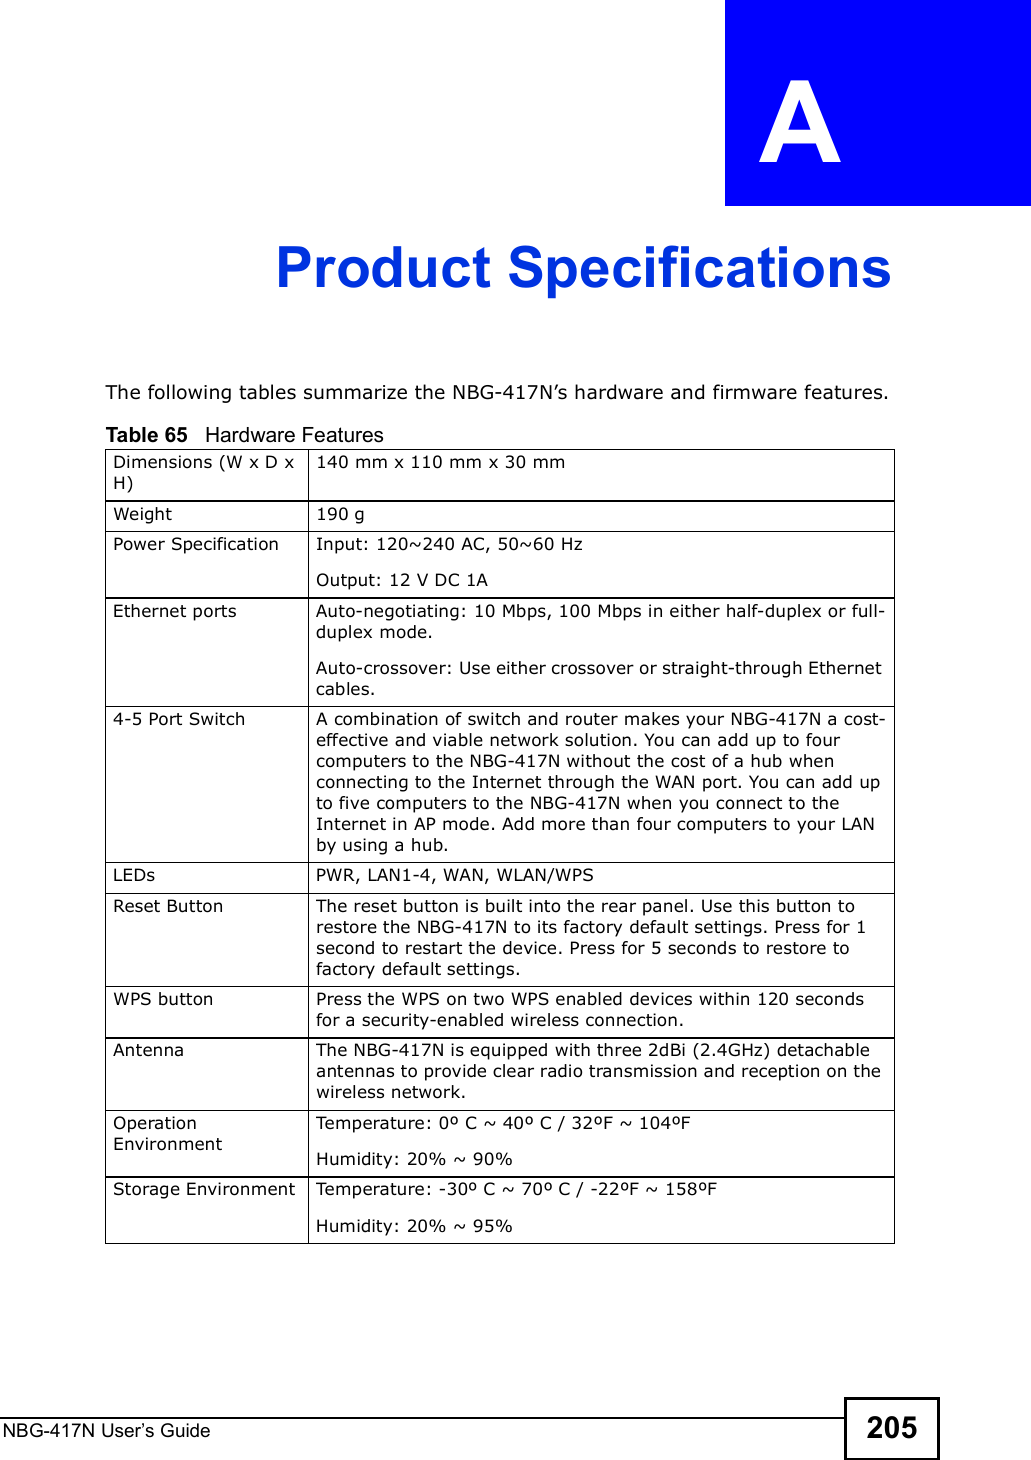 NBG-417N User s Guide 205APPENDIX  A Product SpecificationsThe following tables summarize the NBG-417N!s hardware and firmware features.Table 65   Hardware FeaturesDimensions (W x D x H) 140 mm x 110 mm x 30 mmWeight 190 gPower Specification Input: 120~240 AC, 50~60 HzOutput: 12 V DC 1AEthernet portsAuto-negotiating: 10 Mbps, 100 Mbps in either half-duplex or full-duplex mode.Auto-crossover: Use either crossover or straight-through Ethernet cables.4-5 Port Switch A combination of switch and router makes your NBG-417N a cost-effective and viable network solution. You can add up to four computers to the NBG-417N without the cost of a hub when connecting to the Internet through the WAN port. You can add up to five computers to the NBG-417N when you connect to the Internet in AP mode. Add more than four computers to your LAN by using a hub.LEDsPWR, LAN1-4, WAN, WLAN/WPSReset Button The reset button is built into the rear panel. Use this button to restore the NBG-417N to its factory default settings. Press for 1 second to restart the device. Press for 5 seconds to restore to factory default settings.WPS button Press the WPS on two WPS enabled devices within 120 seconds for a security-enabled wireless connection.Antenna The NBG-417N is equipped with three 2dBi (2.4GHz) detachable antennas to provide clear radio transmission and reception on the wireless network. Operation EnvironmentTemperature: 0º C ~ 40º C / 32ºF ~ 104ºFHumidity: 20% ~ 90% Storage Environment Temperature: -30º C ~ 70º C / -22ºF ~ 158ºFHumidity: 20% ~ 95% 